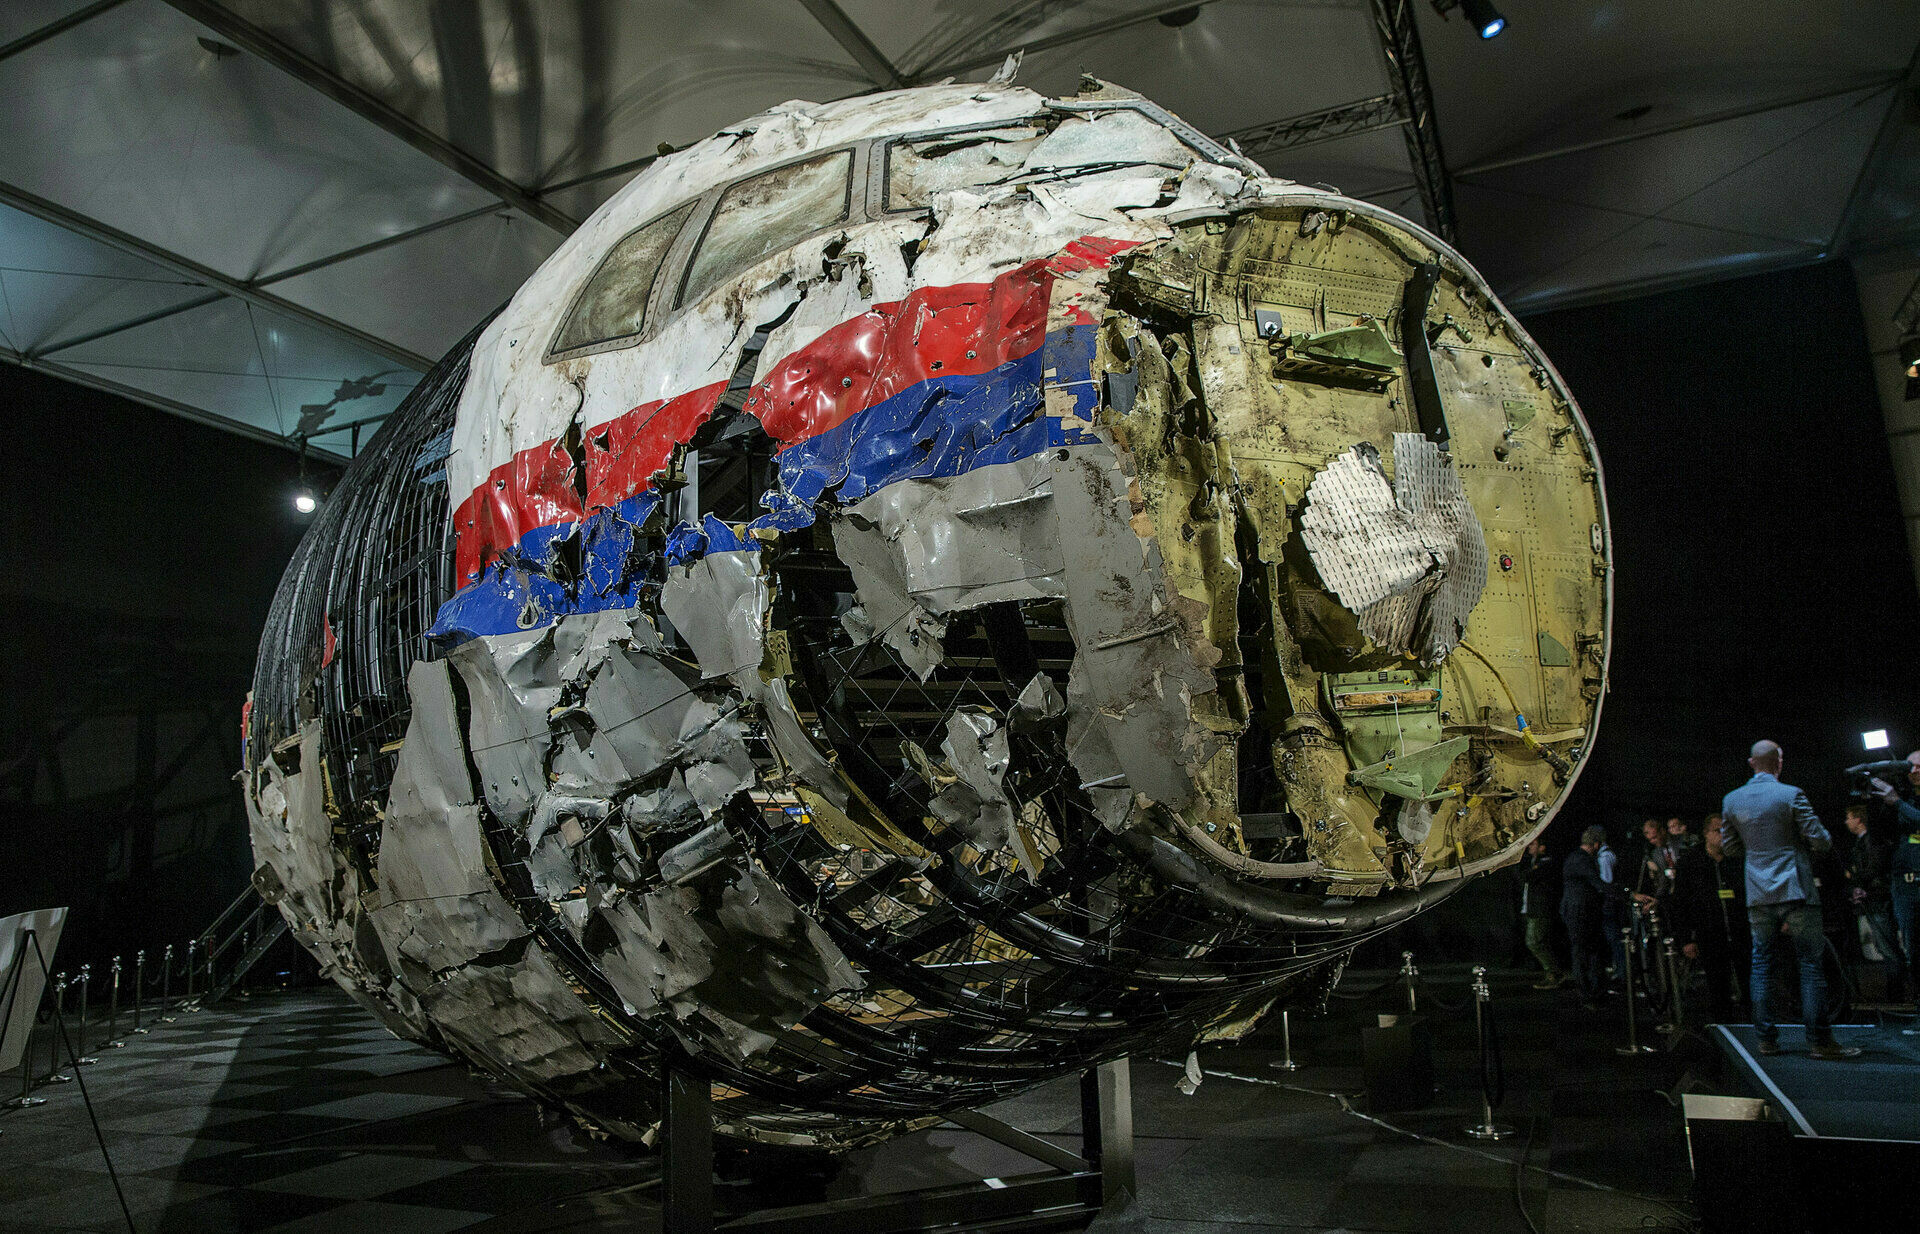 MH-17 case: the damaging elements were not from the Buk missile